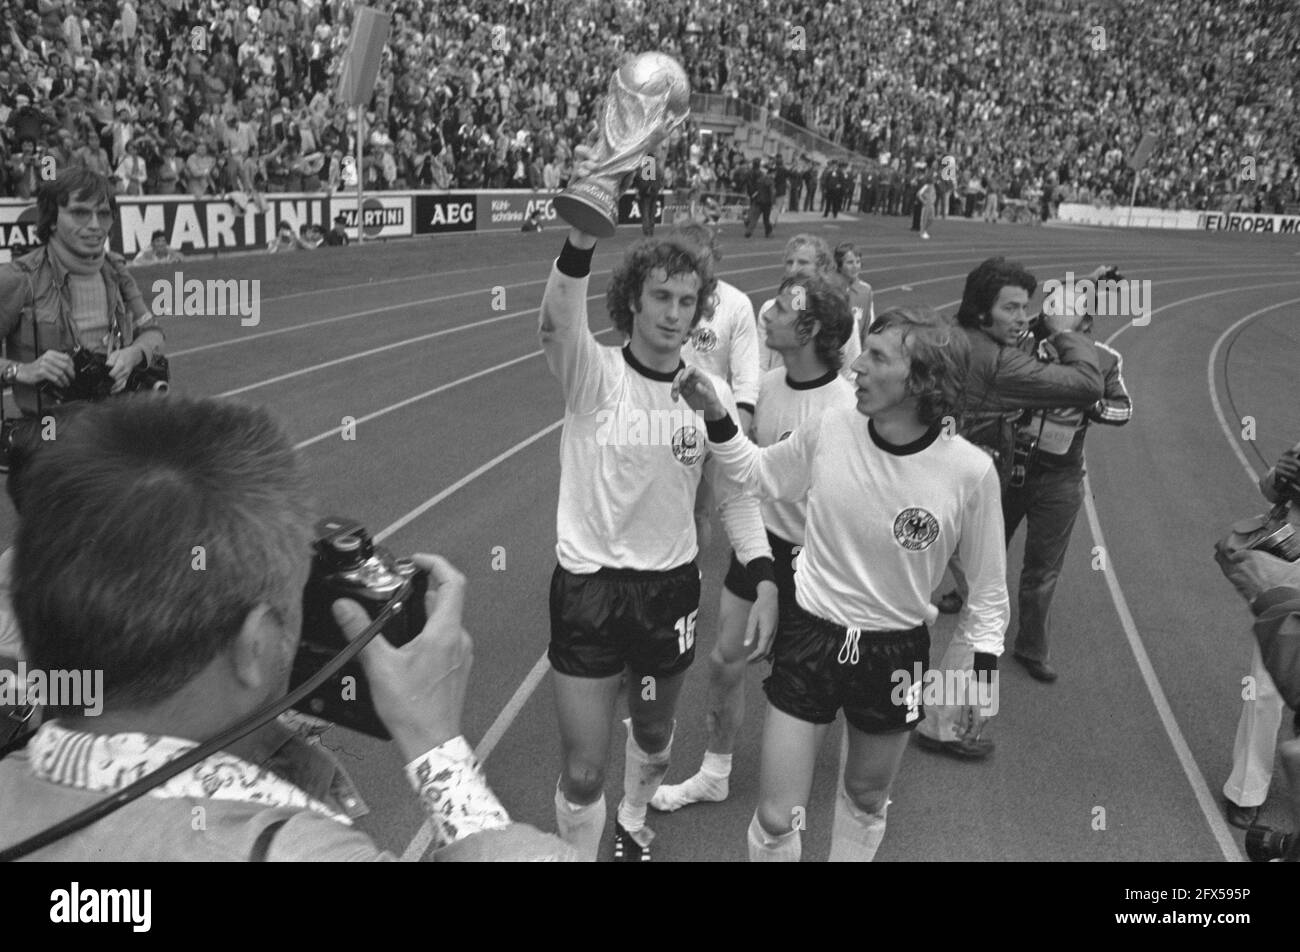 Finals World Cup 1974 in Munich, West Germany v Netherlands 2-1; German players with the world cup, July 7, 1974, PLAYERS, finals, sports, soccer, world championships, The Netherlands, 20th century press agency photo, news to remember, documentary, historic photography 1945-1990, visual stories, human history of the Twentieth Century, capturing moments in time Stock Photo